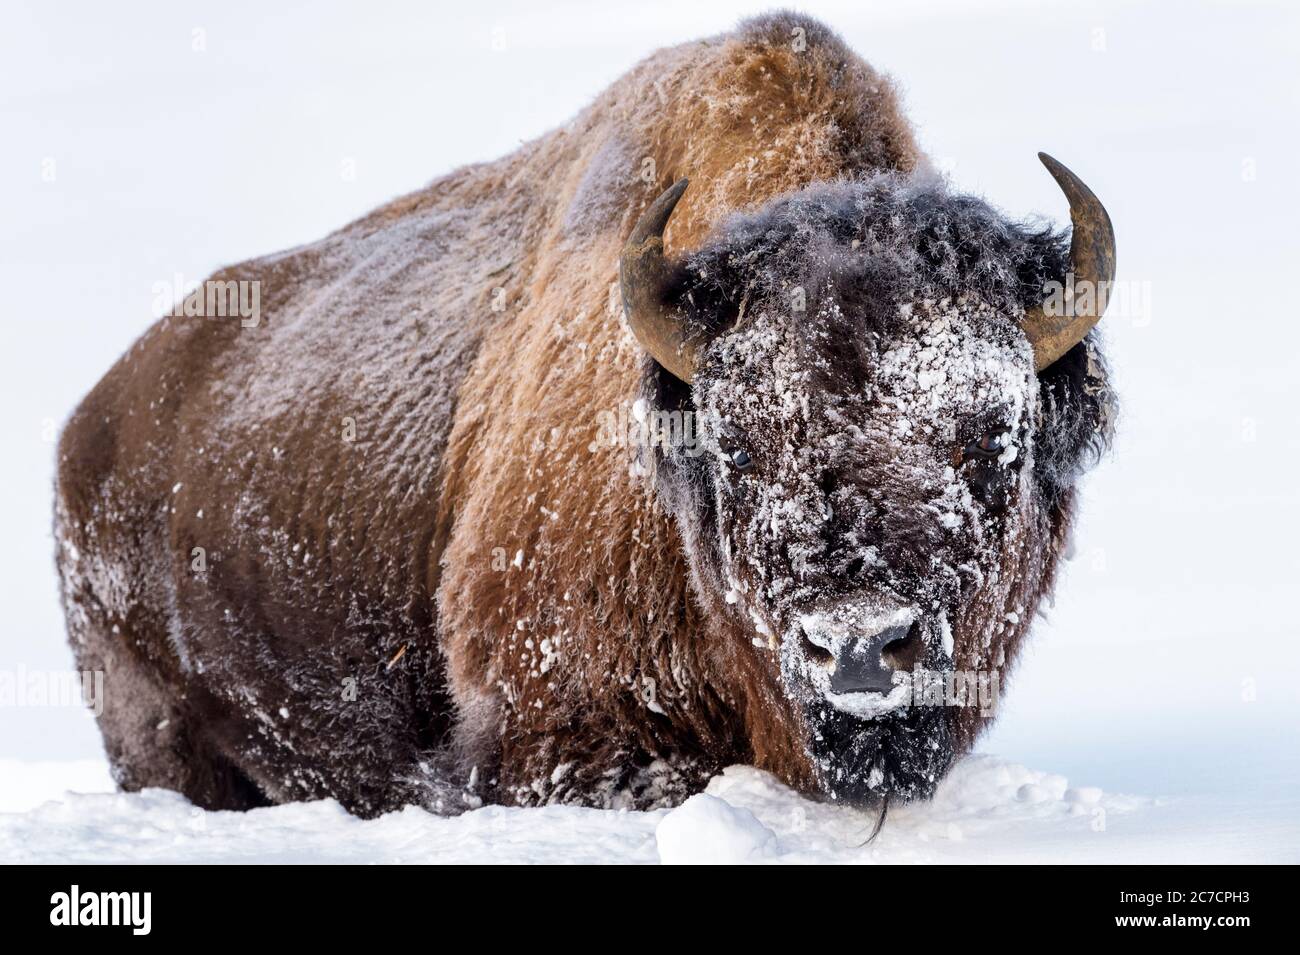 Frozen American Bison (Bison bison) standing in snow, looking at camera, Yellowstone National Park, Wyoming, United States Stock Photo